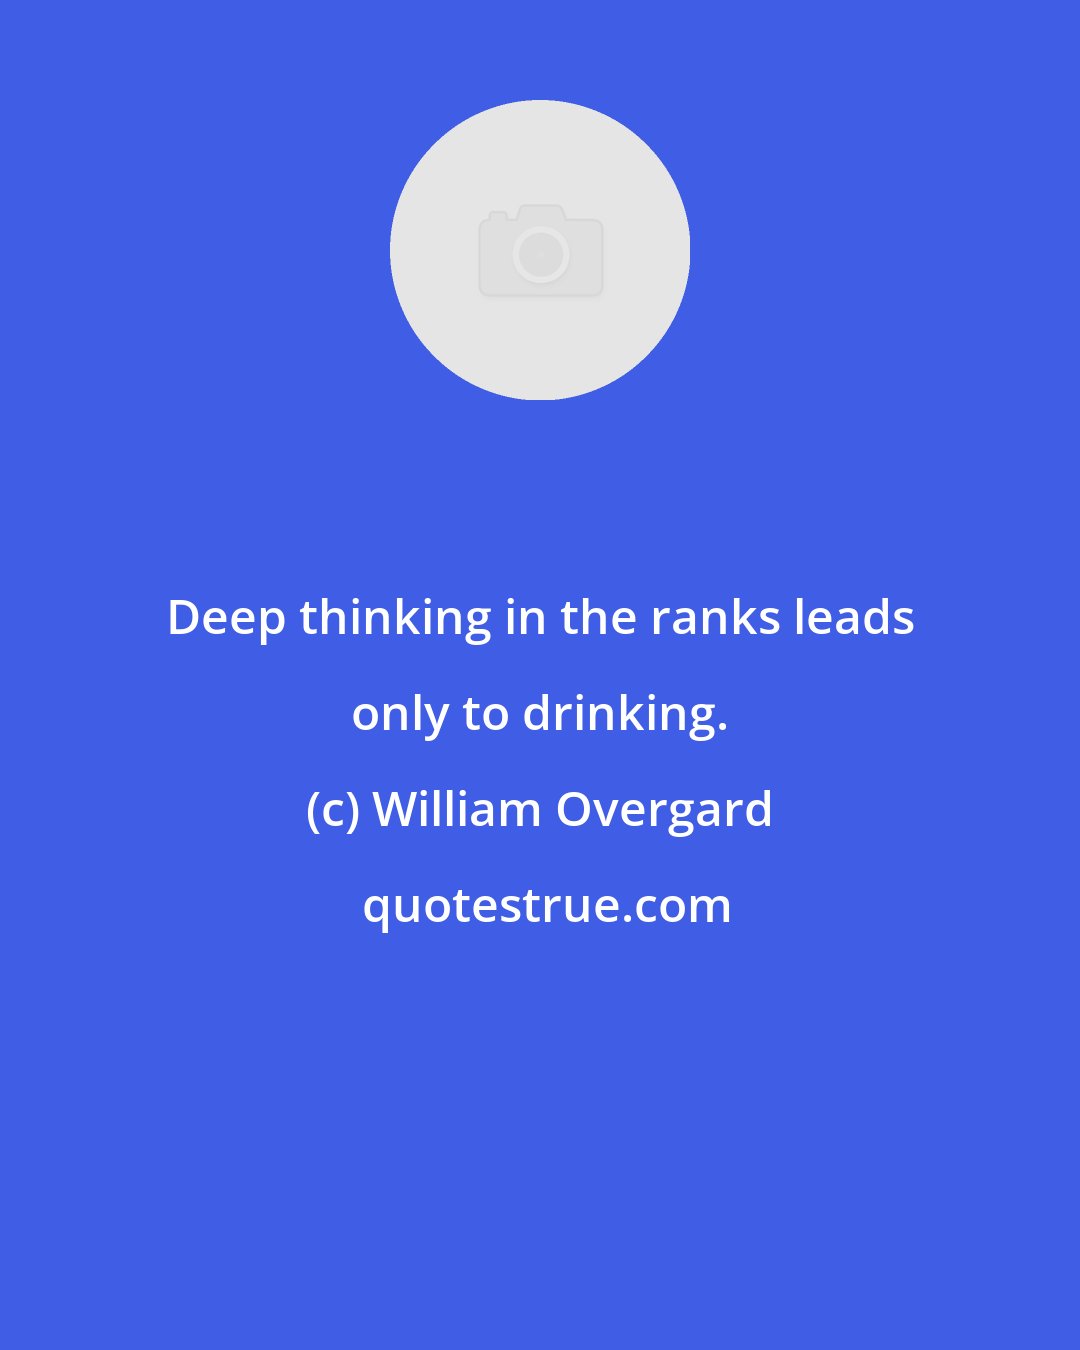 William Overgard: Deep thinking in the ranks leads only to drinking.